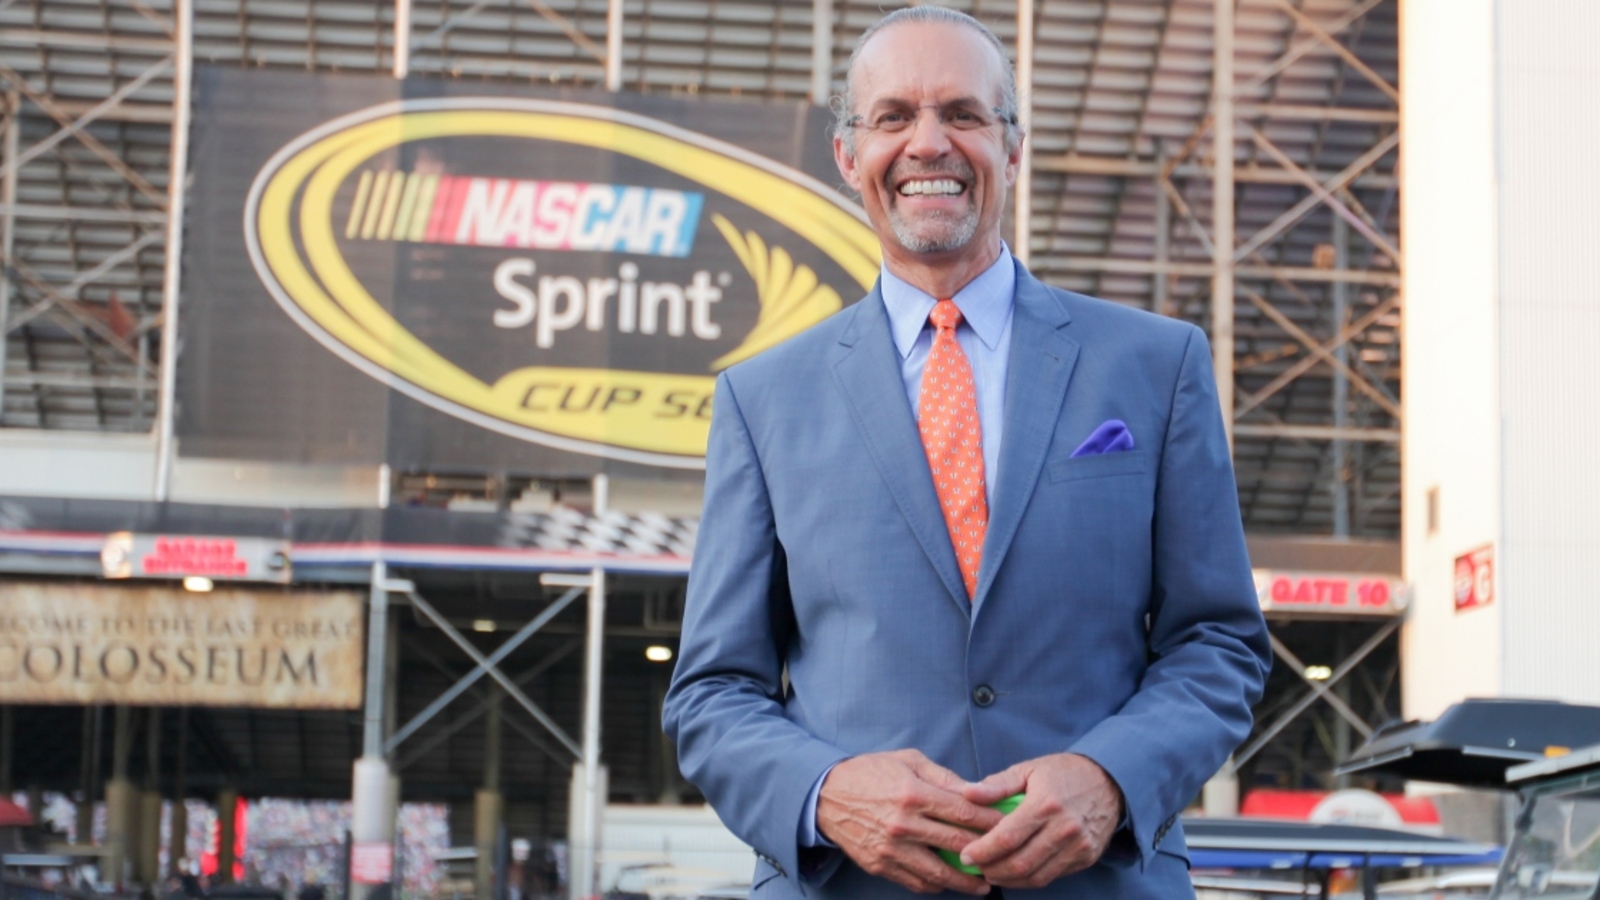 Kyle Petty reflects on Petty Family 75th anniversary: ‘It’s special’